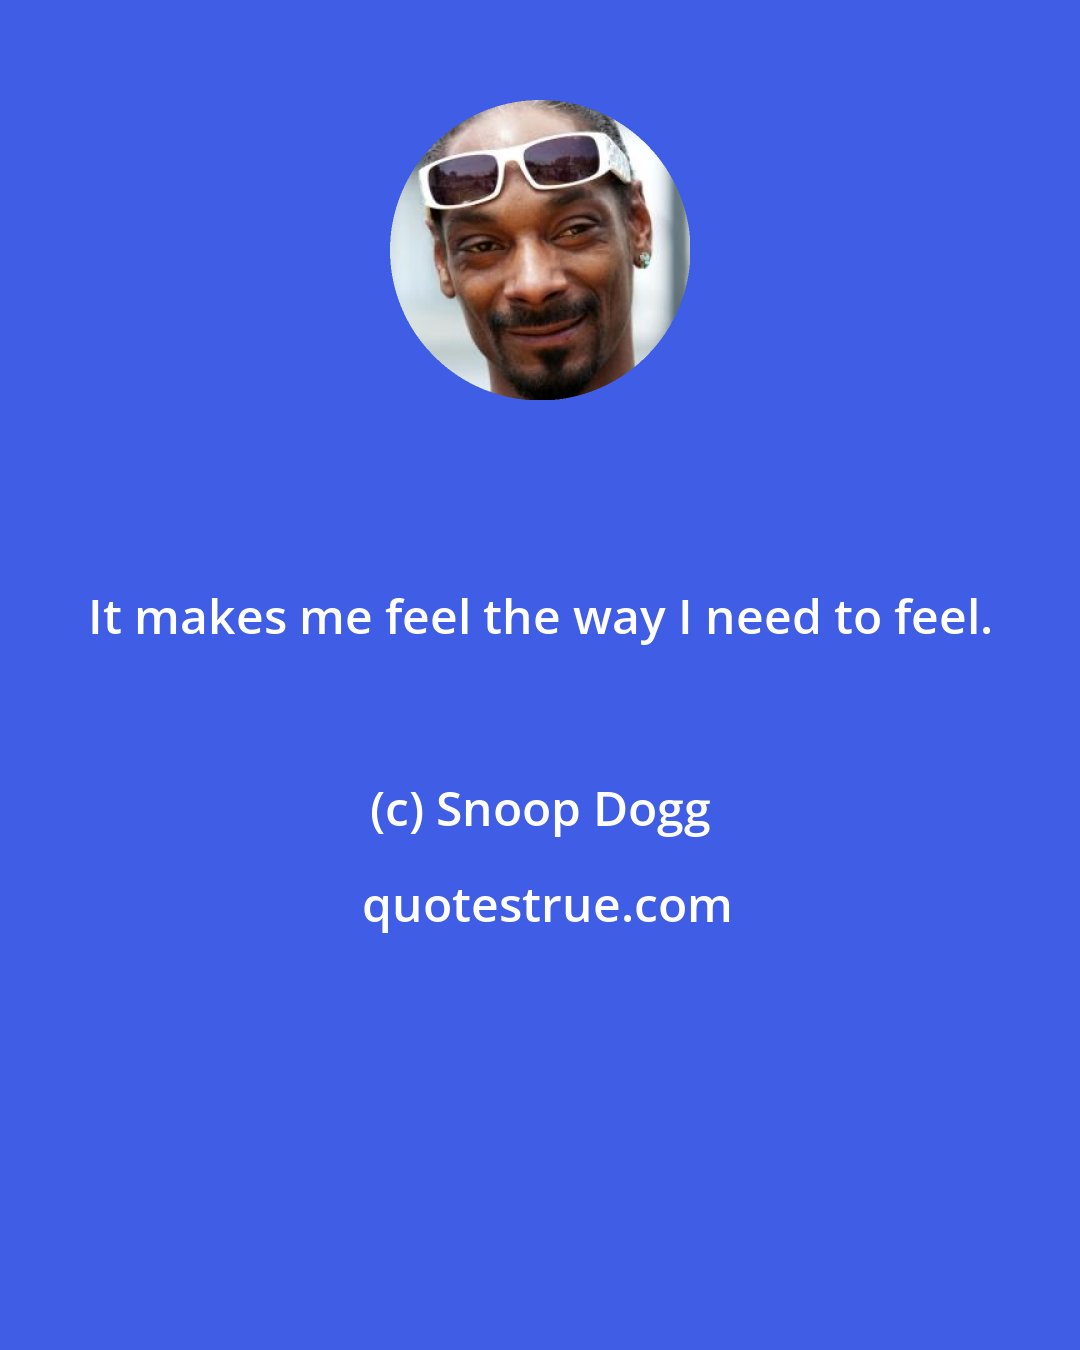 Snoop Dogg: It makes me feel the way I need to feel.